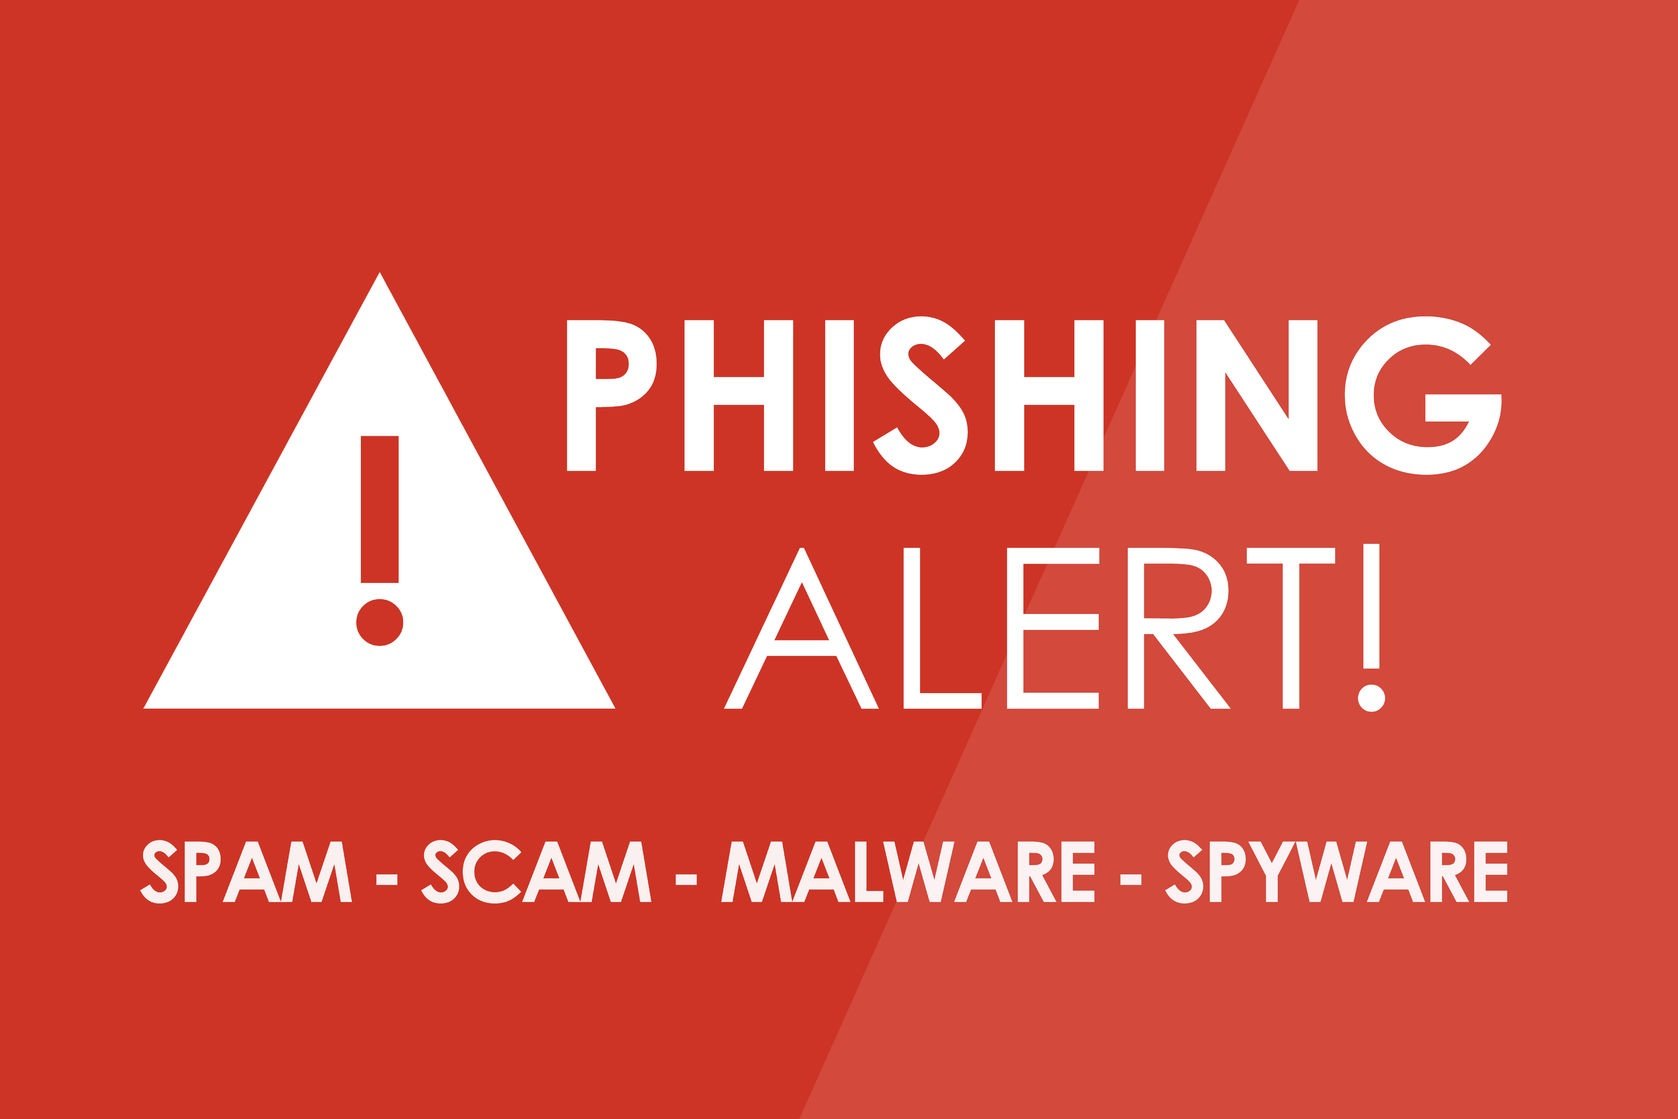 Is Your Inbox A Crime Scene? 6 Ways to Evaluate Potential Phishing Scams - Featured Image